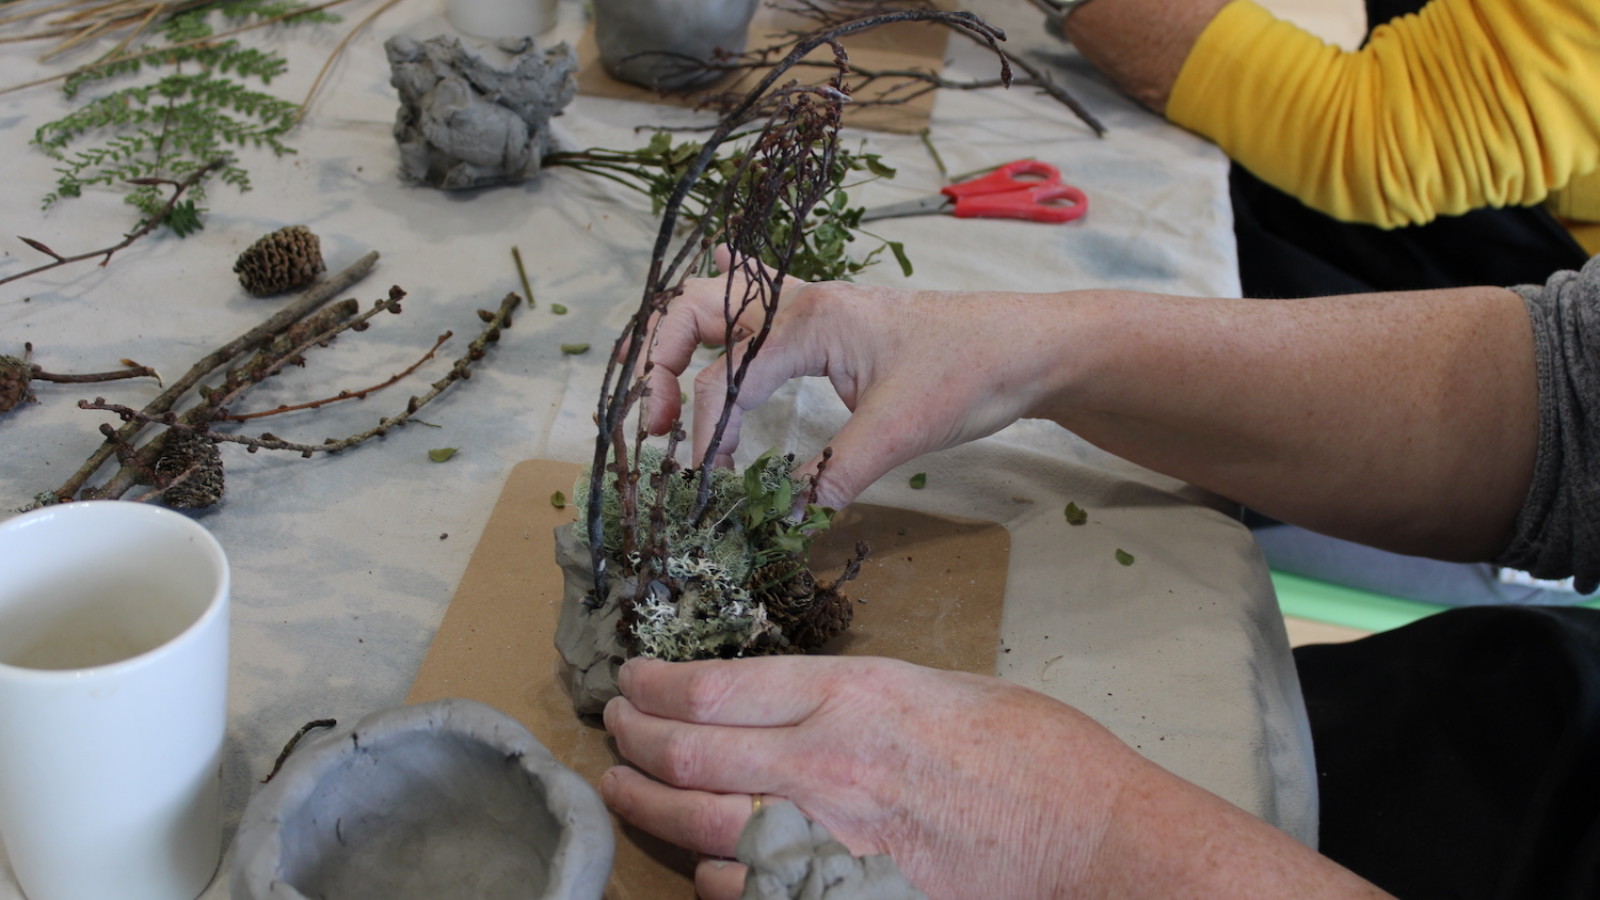 A pair of hands are photographed at a table moulding clay around some twigs and other natural objects.